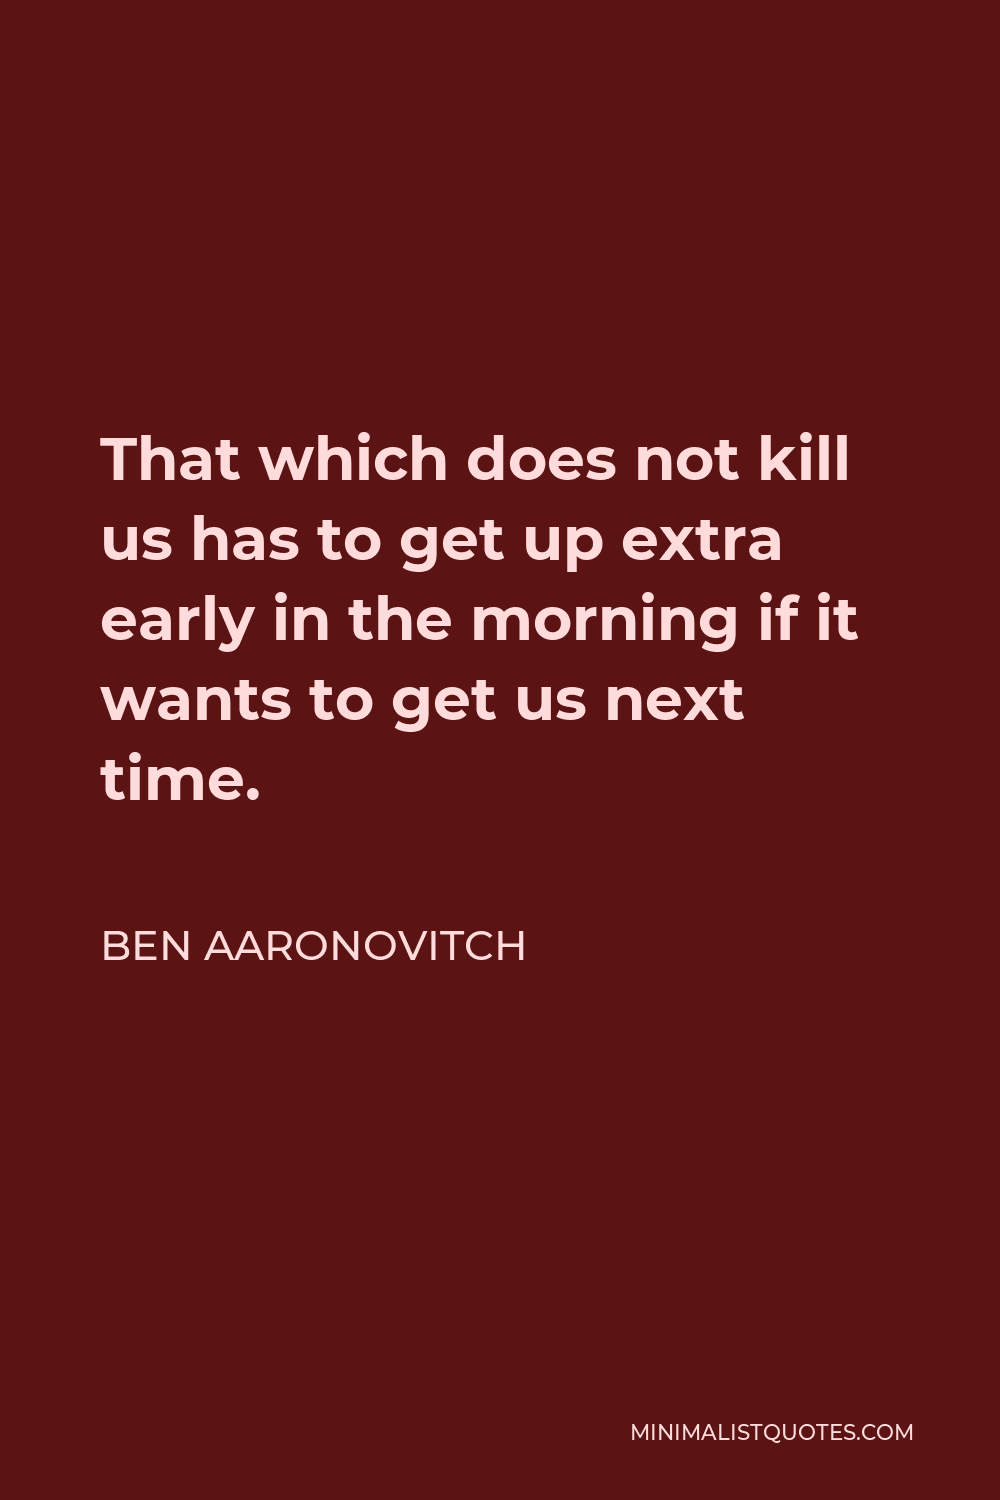 Ben Aaronovitch Quote - That which does not kill us has to get up extra early in the morning if it wants to get us next time.